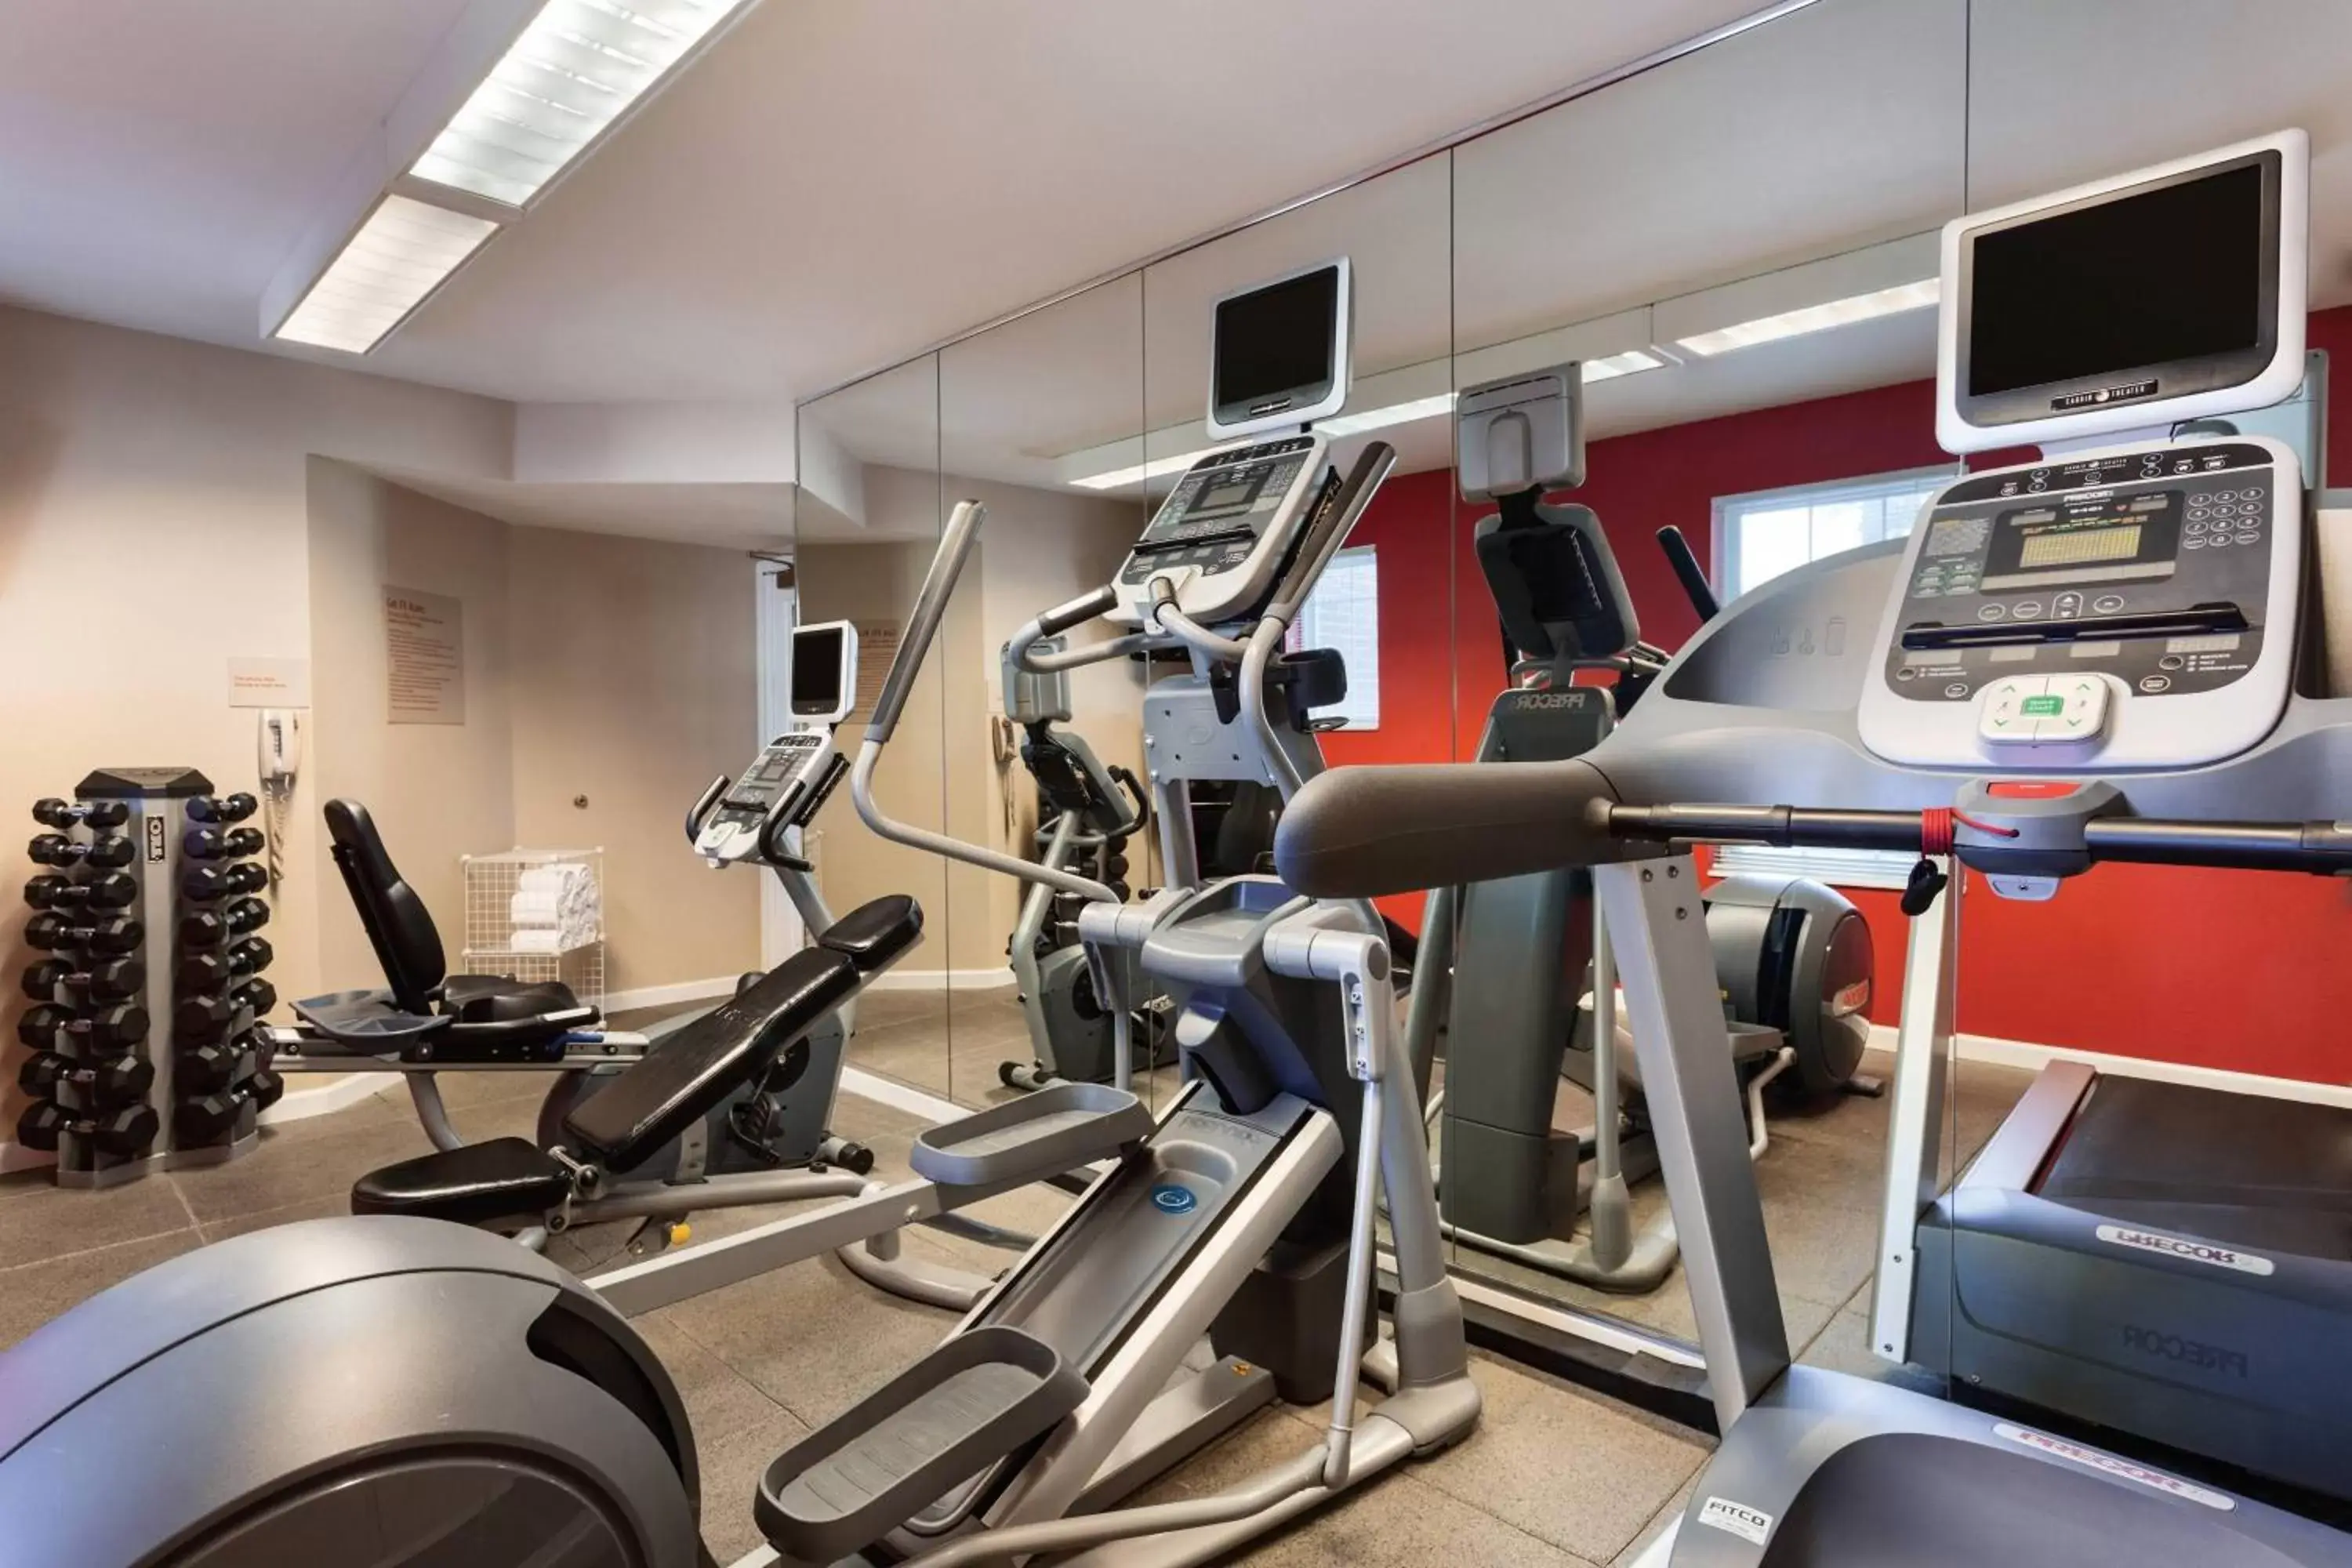 Fitness centre/facilities, Fitness Center/Facilities in TownePlace Suites Salt Lake City Layton